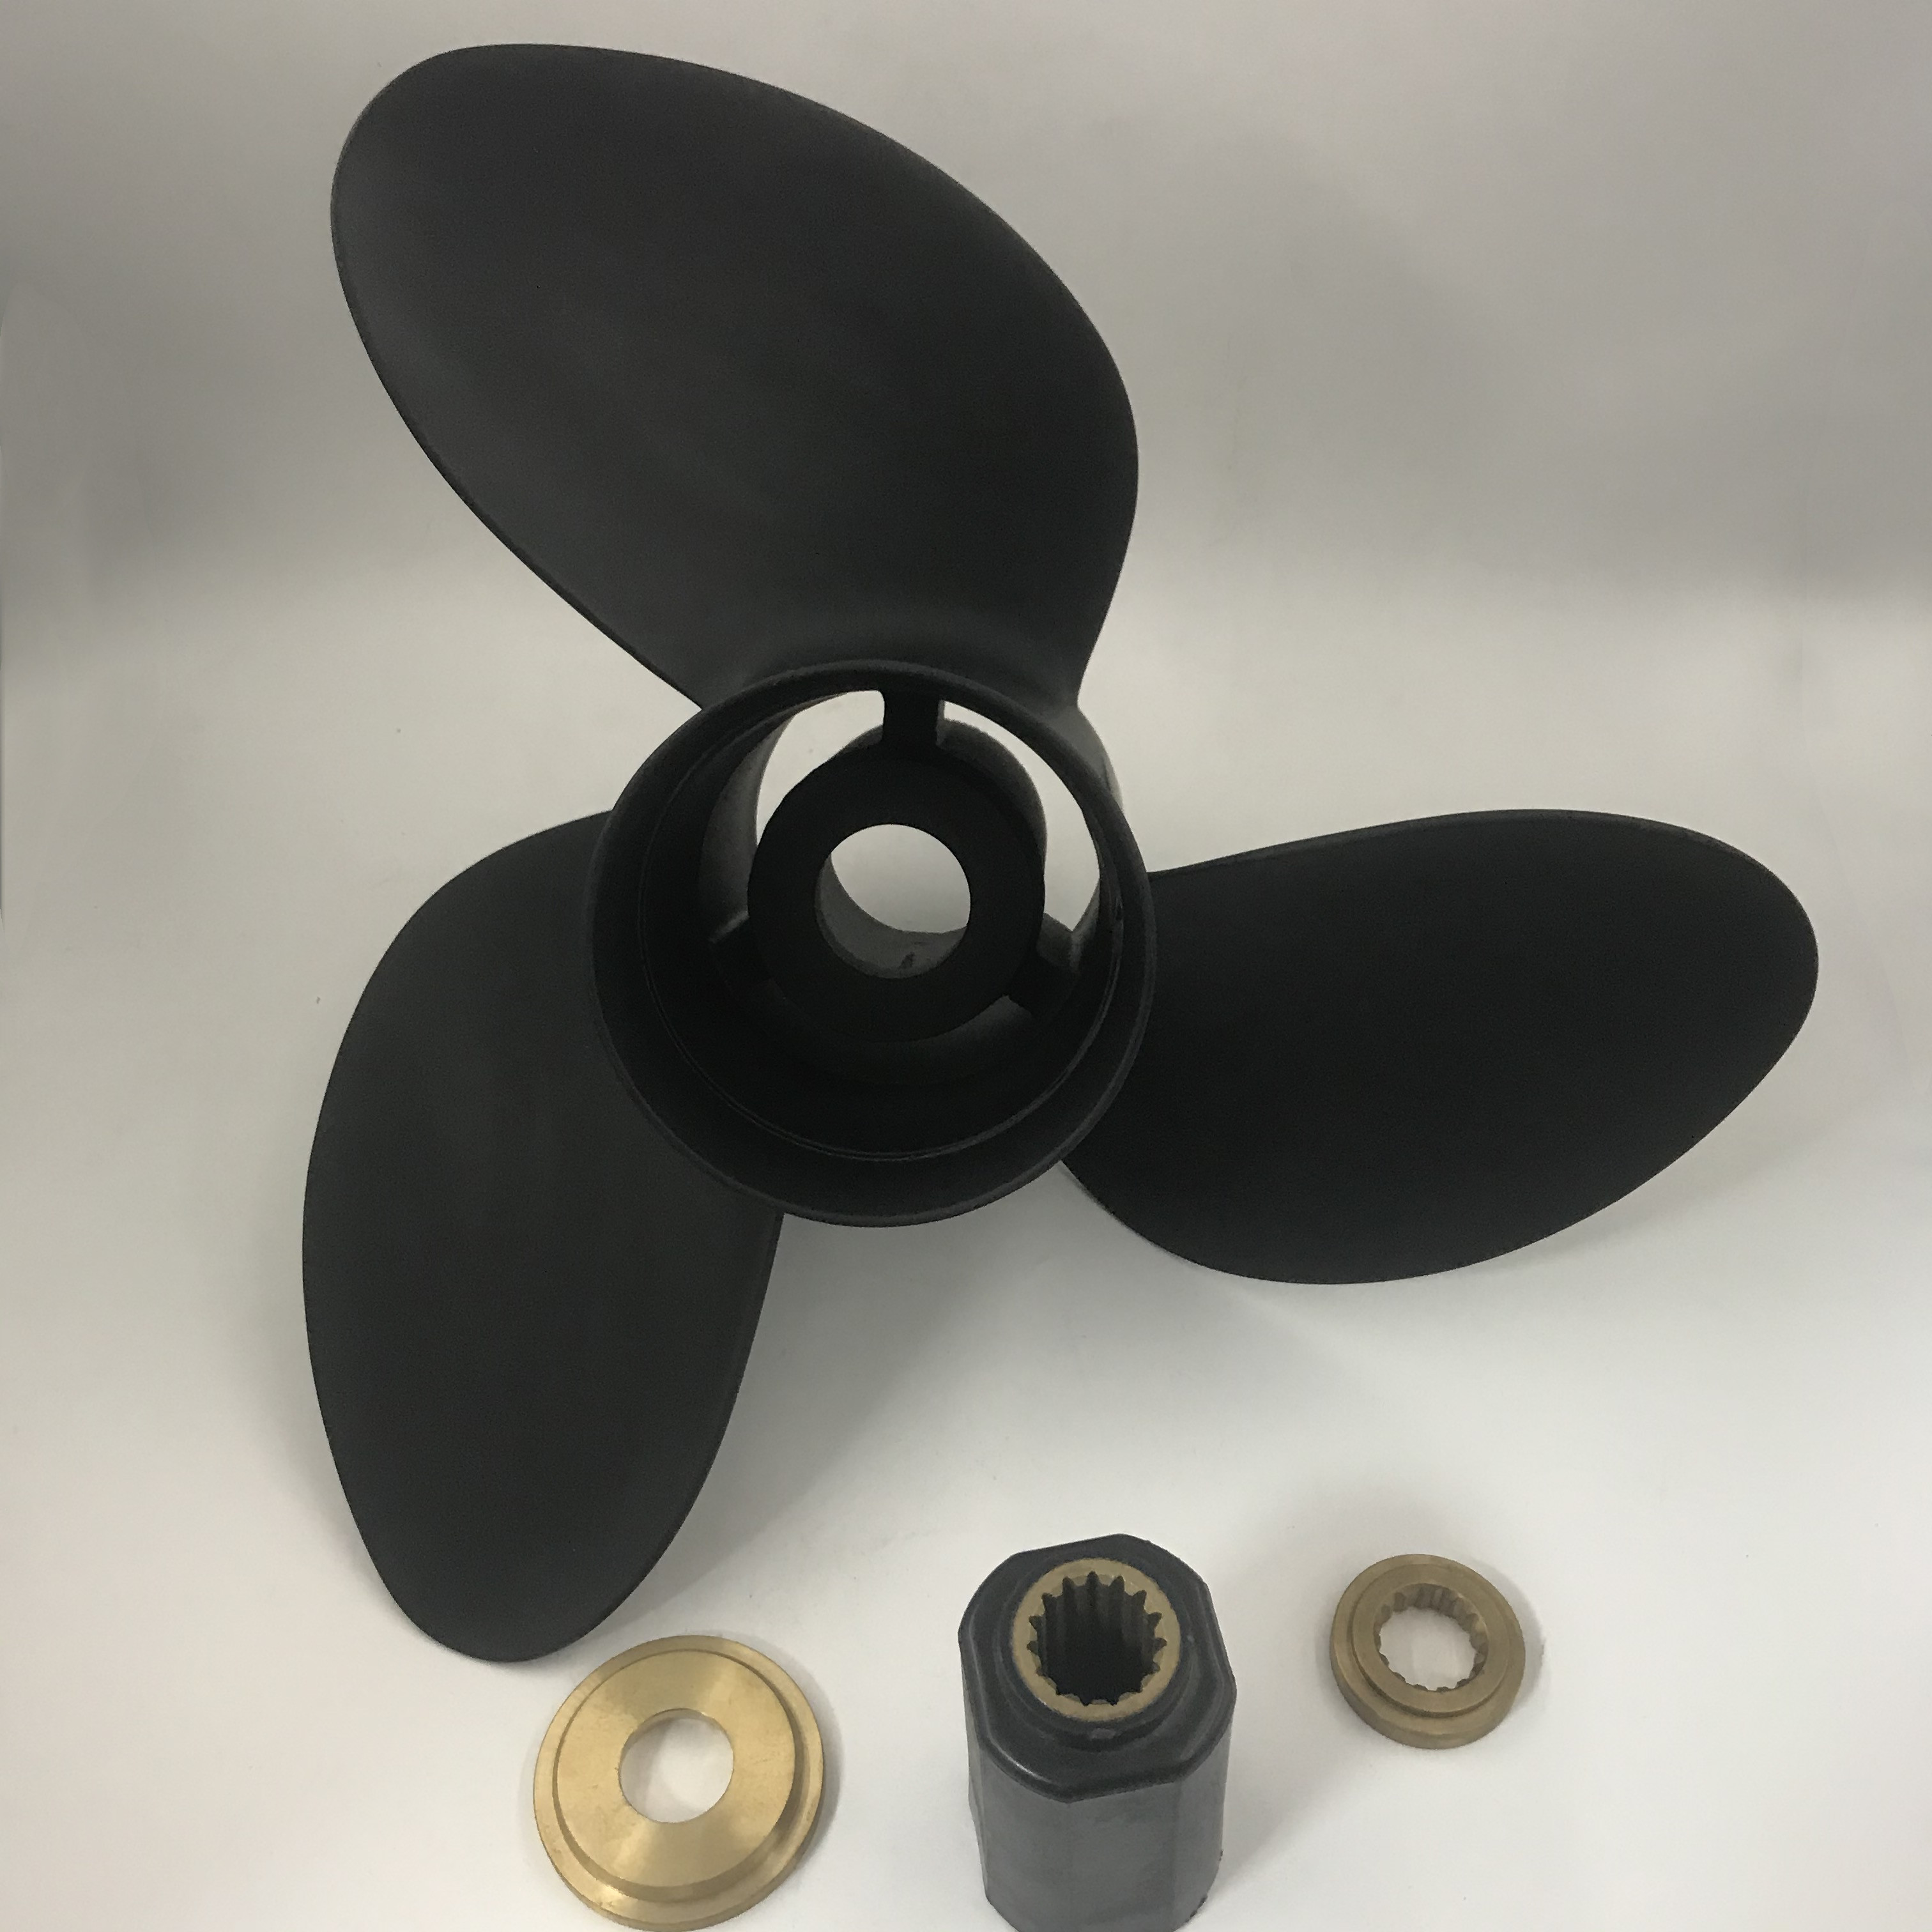 13.2 x 15 Aluminum Propeller for Tohatsu Nissan Outboard 115-250HP